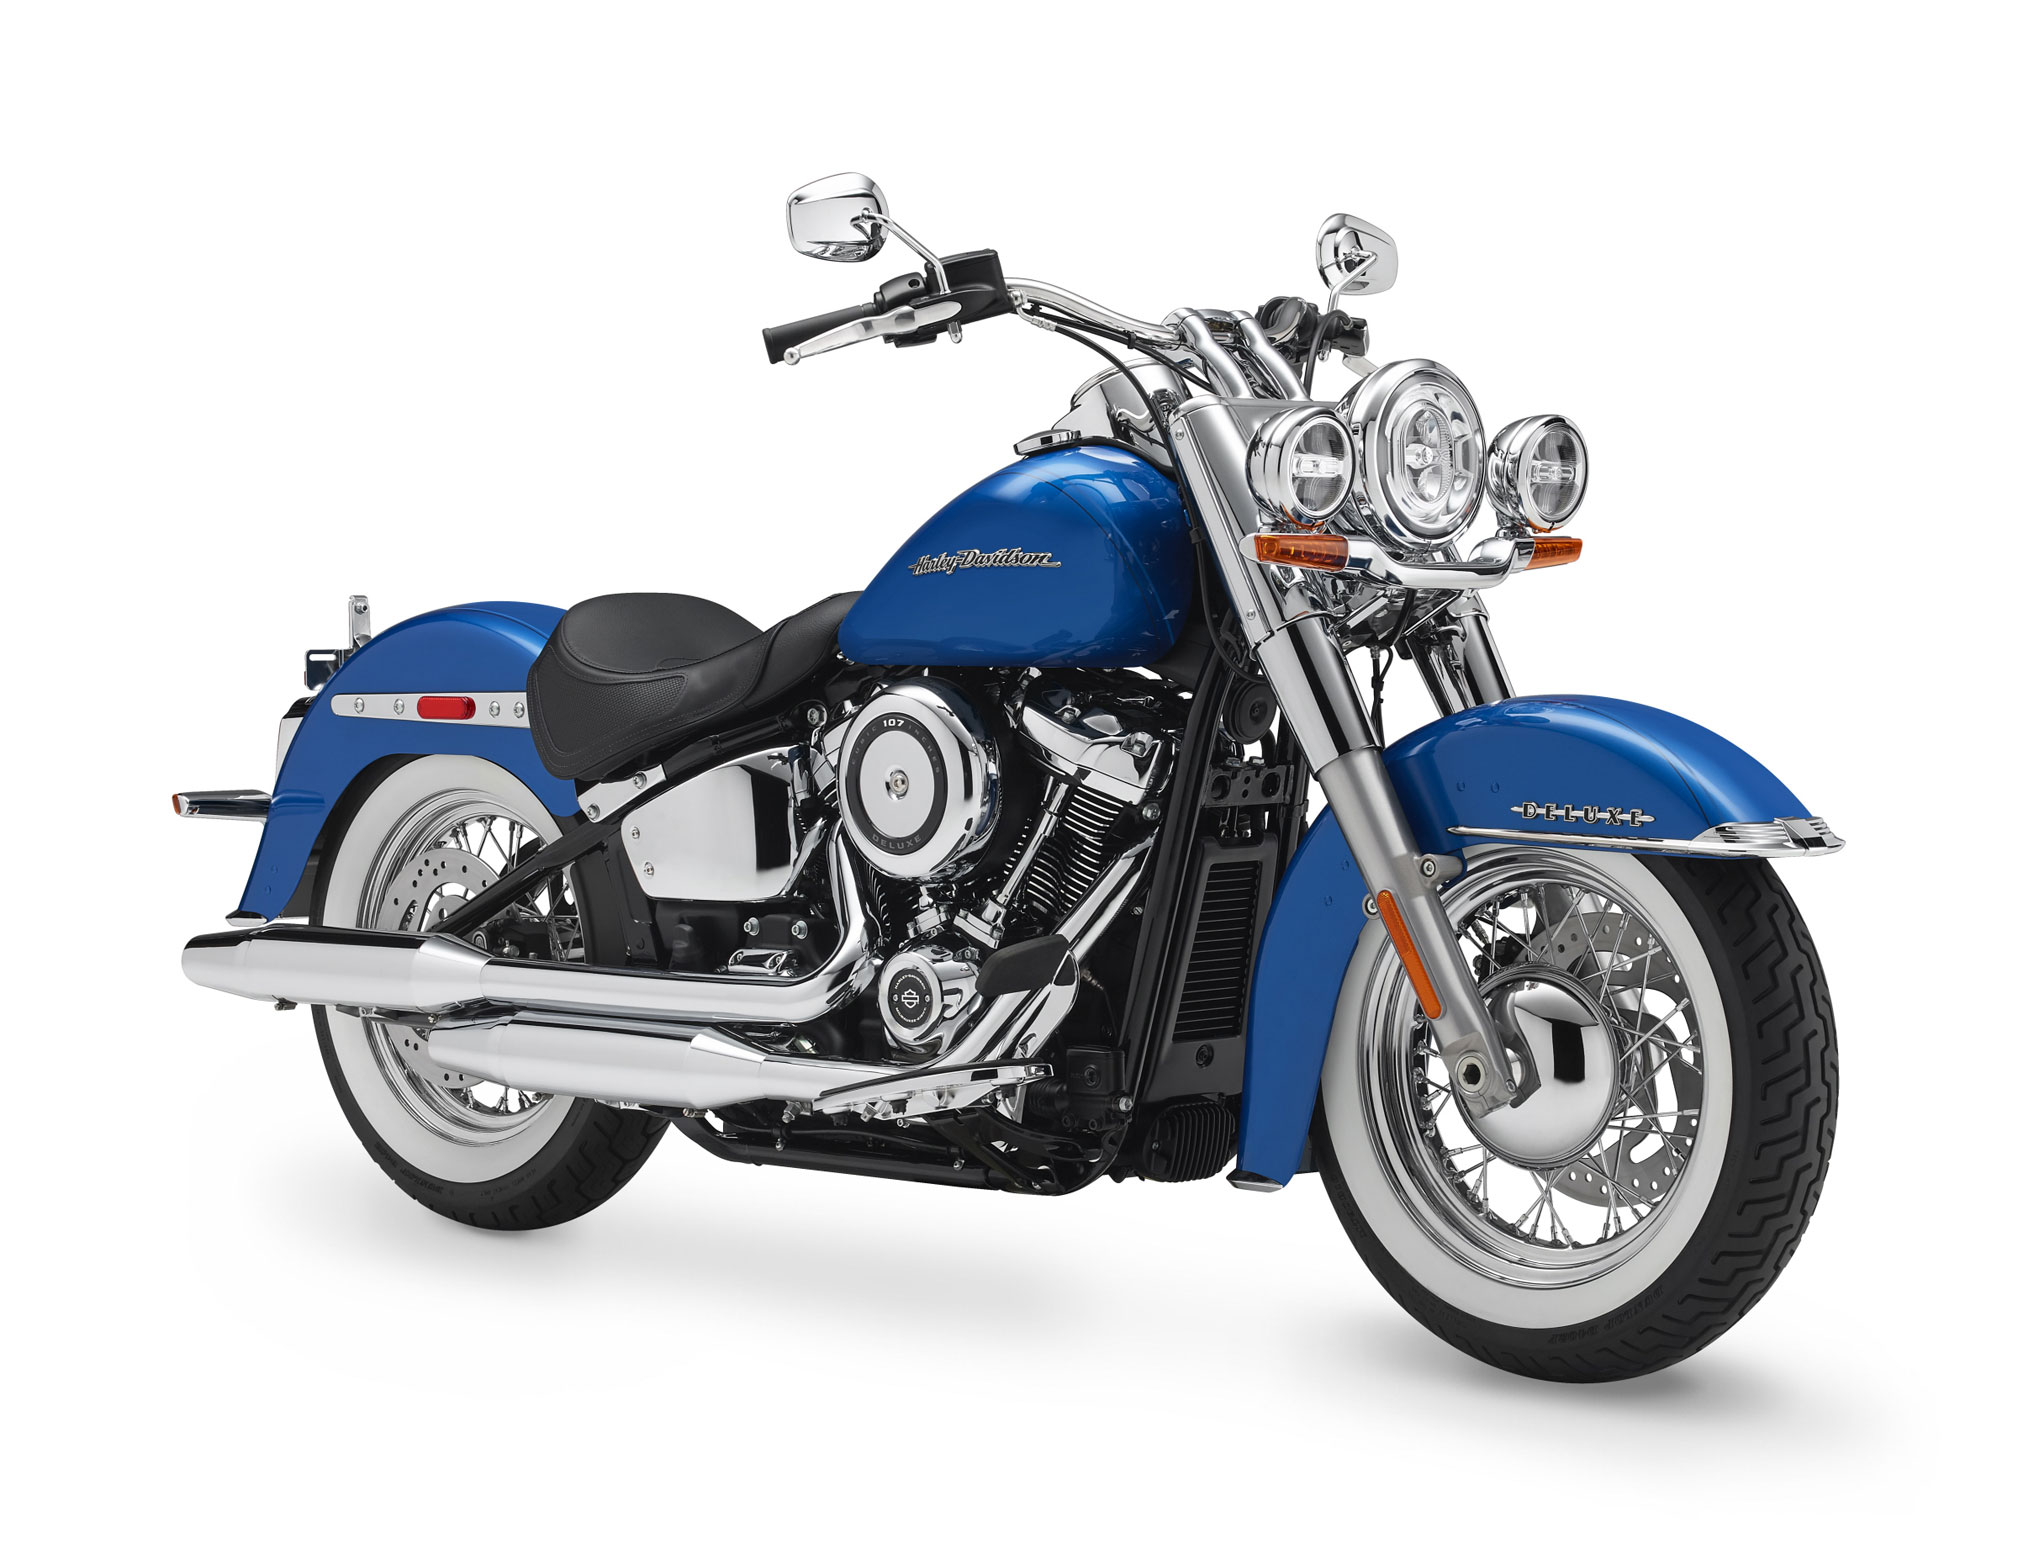 2018 Harley Davidson Deluxe Review Total Motorcycle